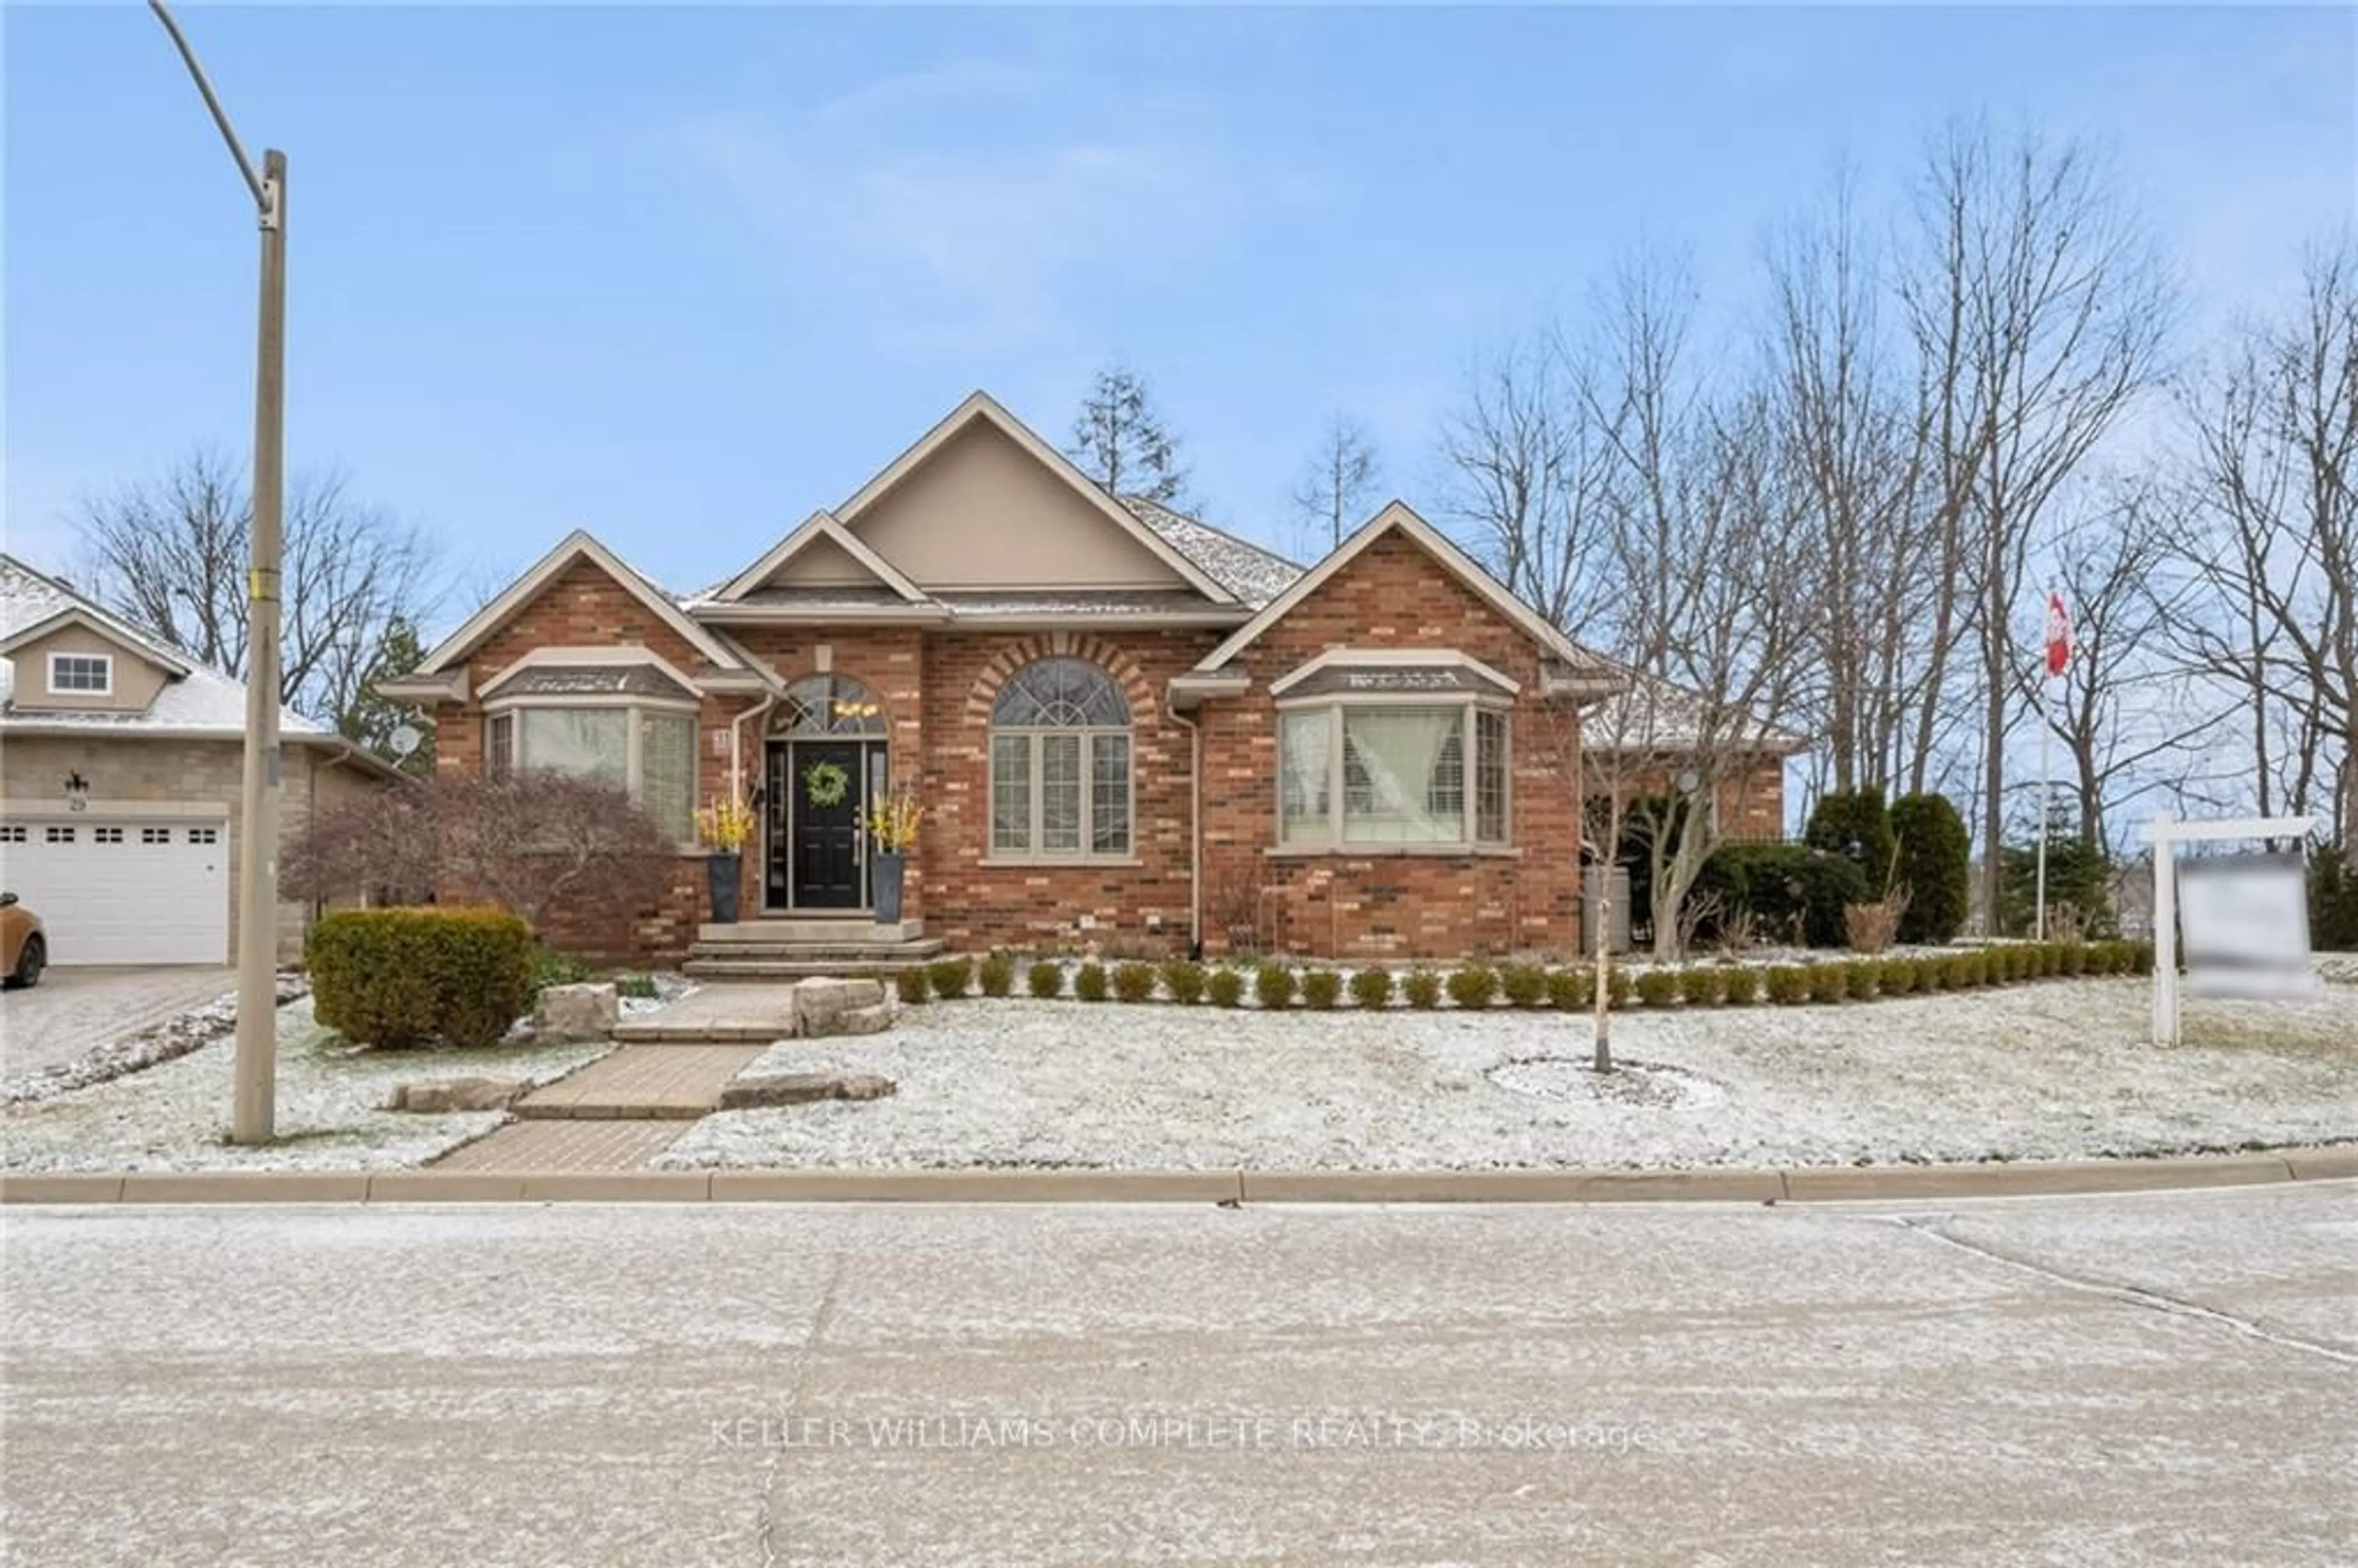 Home with brick exterior material for 31 Ormerod Clse, Hamilton Ontario L9H 7N7